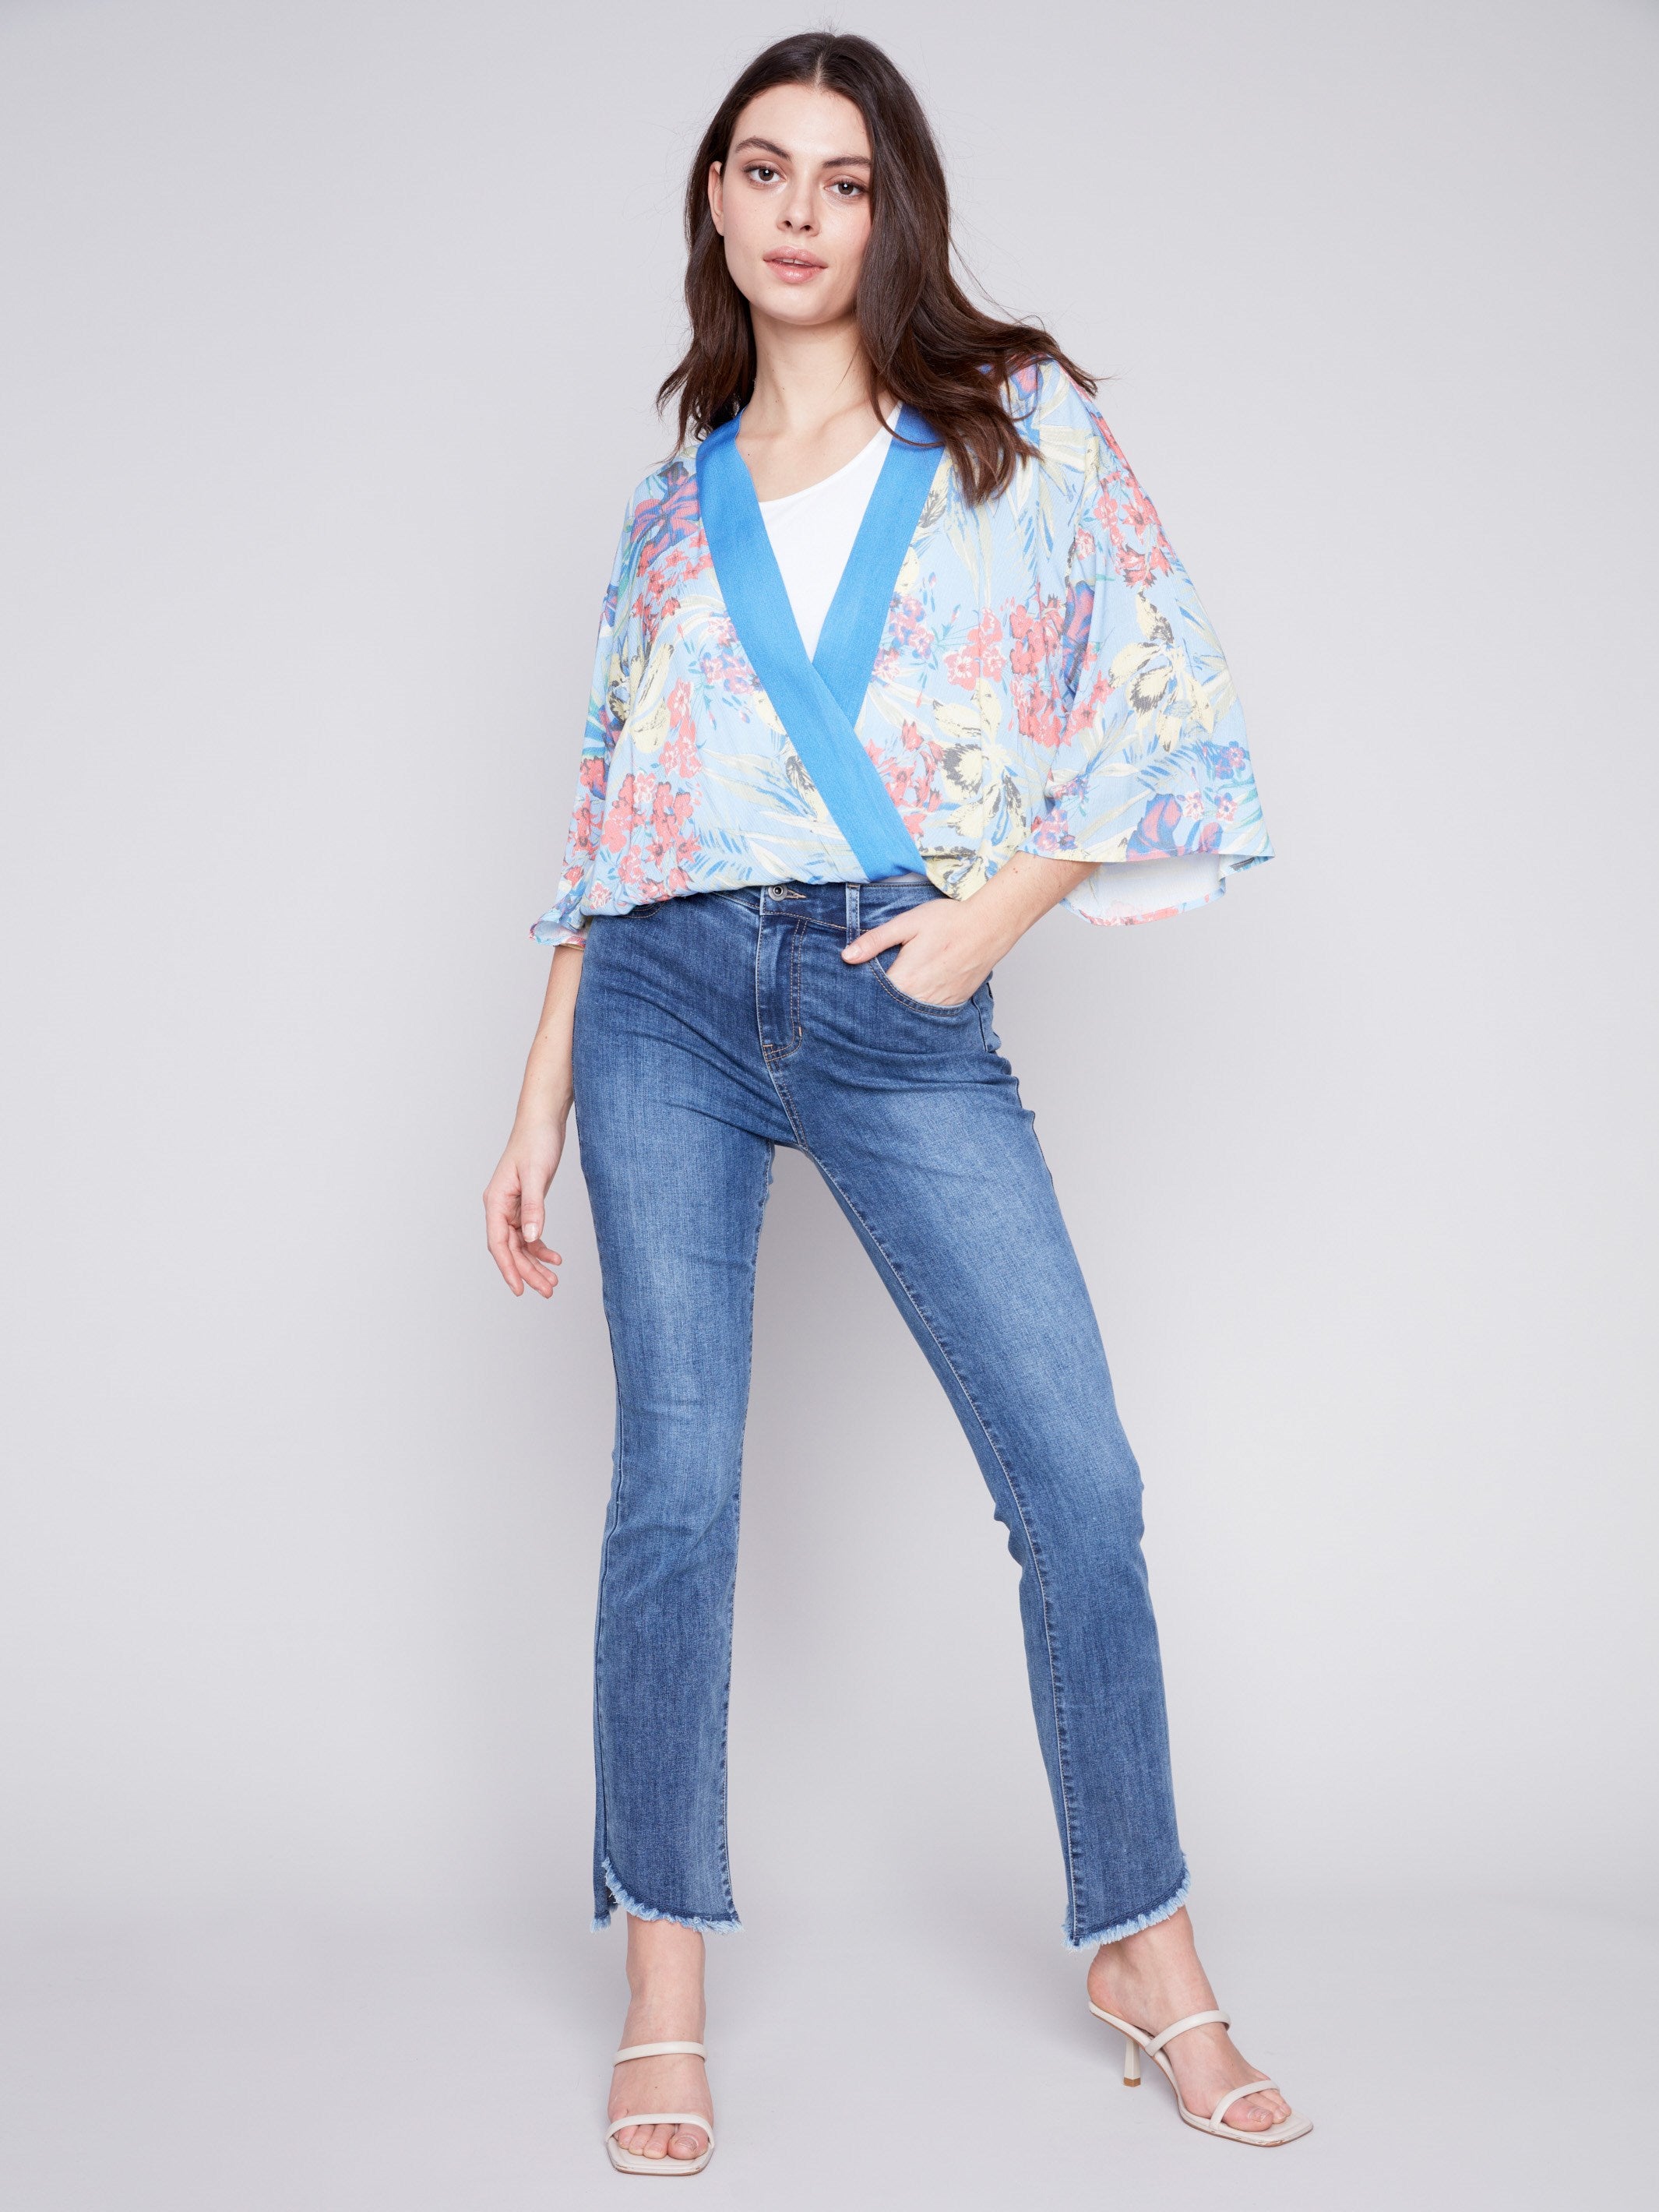 Printed Overlap Blouse - Lillypad - Charlie B Collection Canada - Image 4